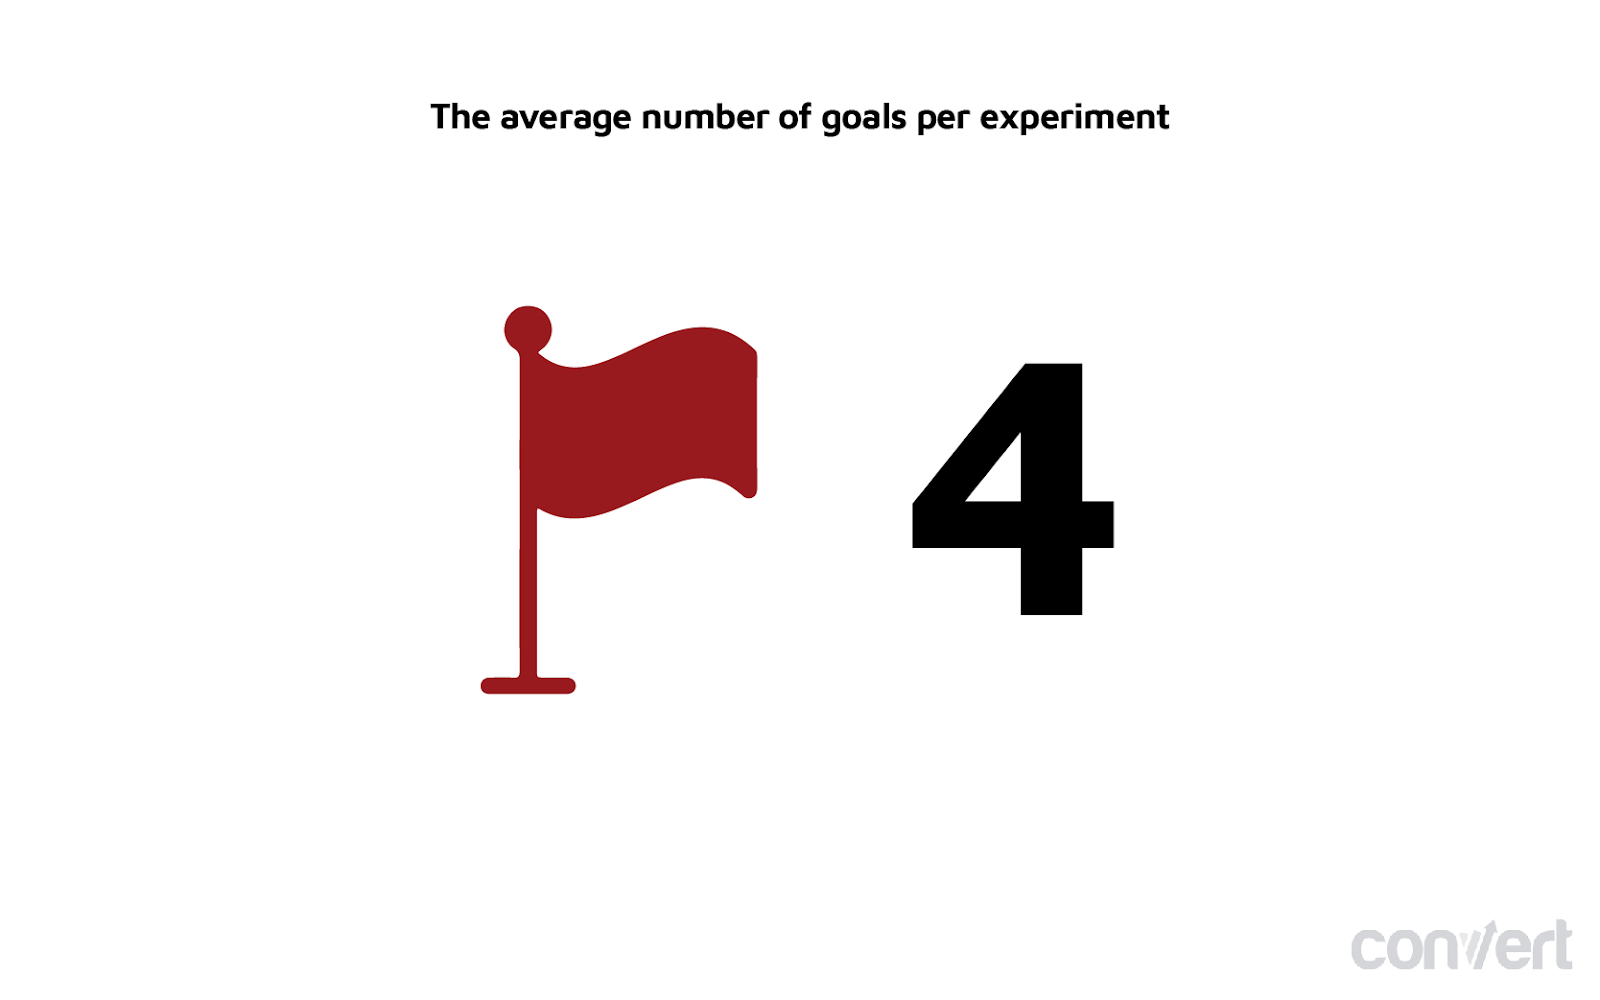 chart showing the average number of experiments.